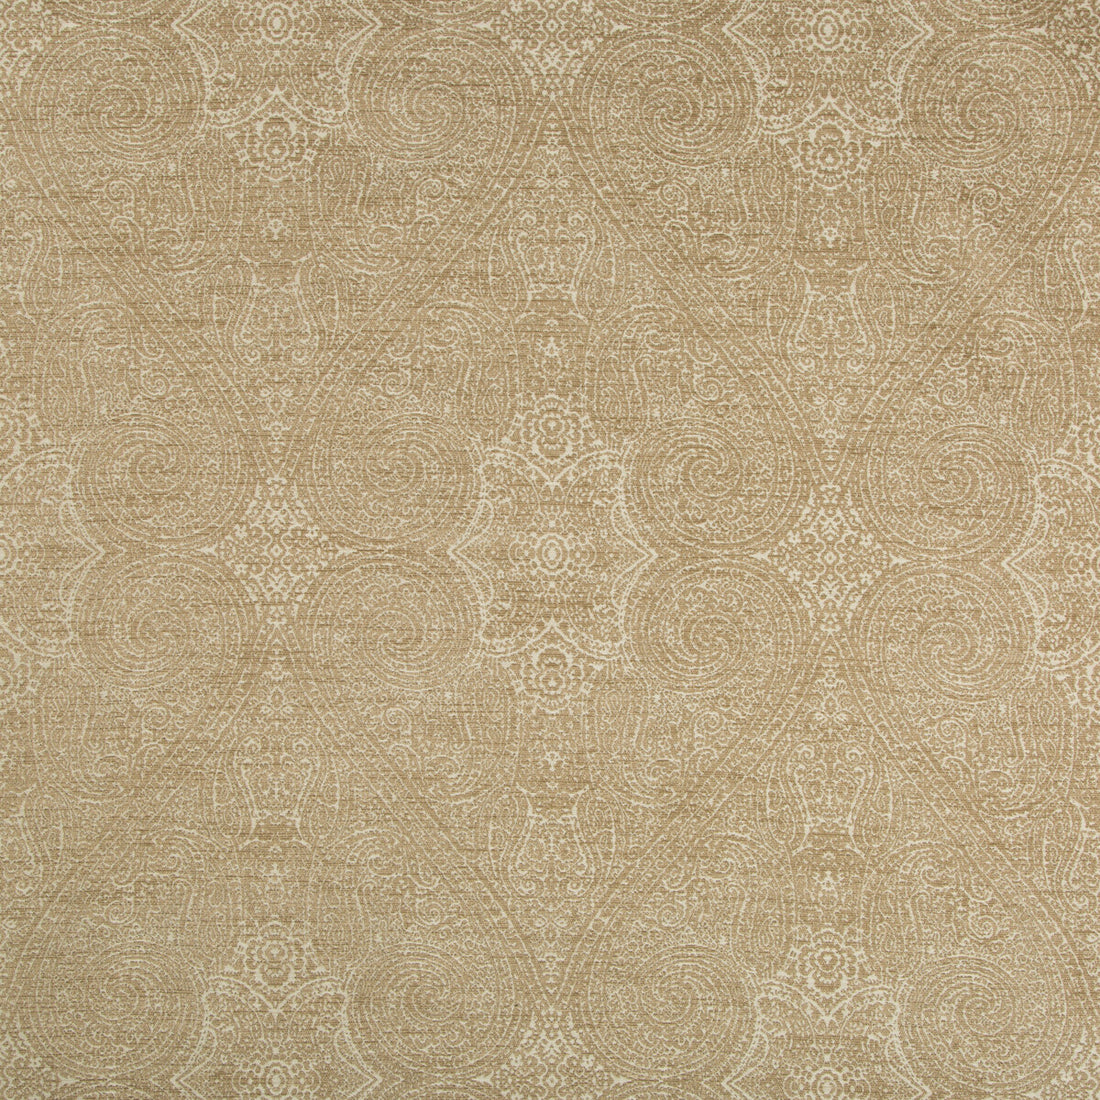 Kravet Contract fabric in 35131-606 color - pattern 35131.606.0 - by Kravet Contract in the Incase Crypton Gis collection